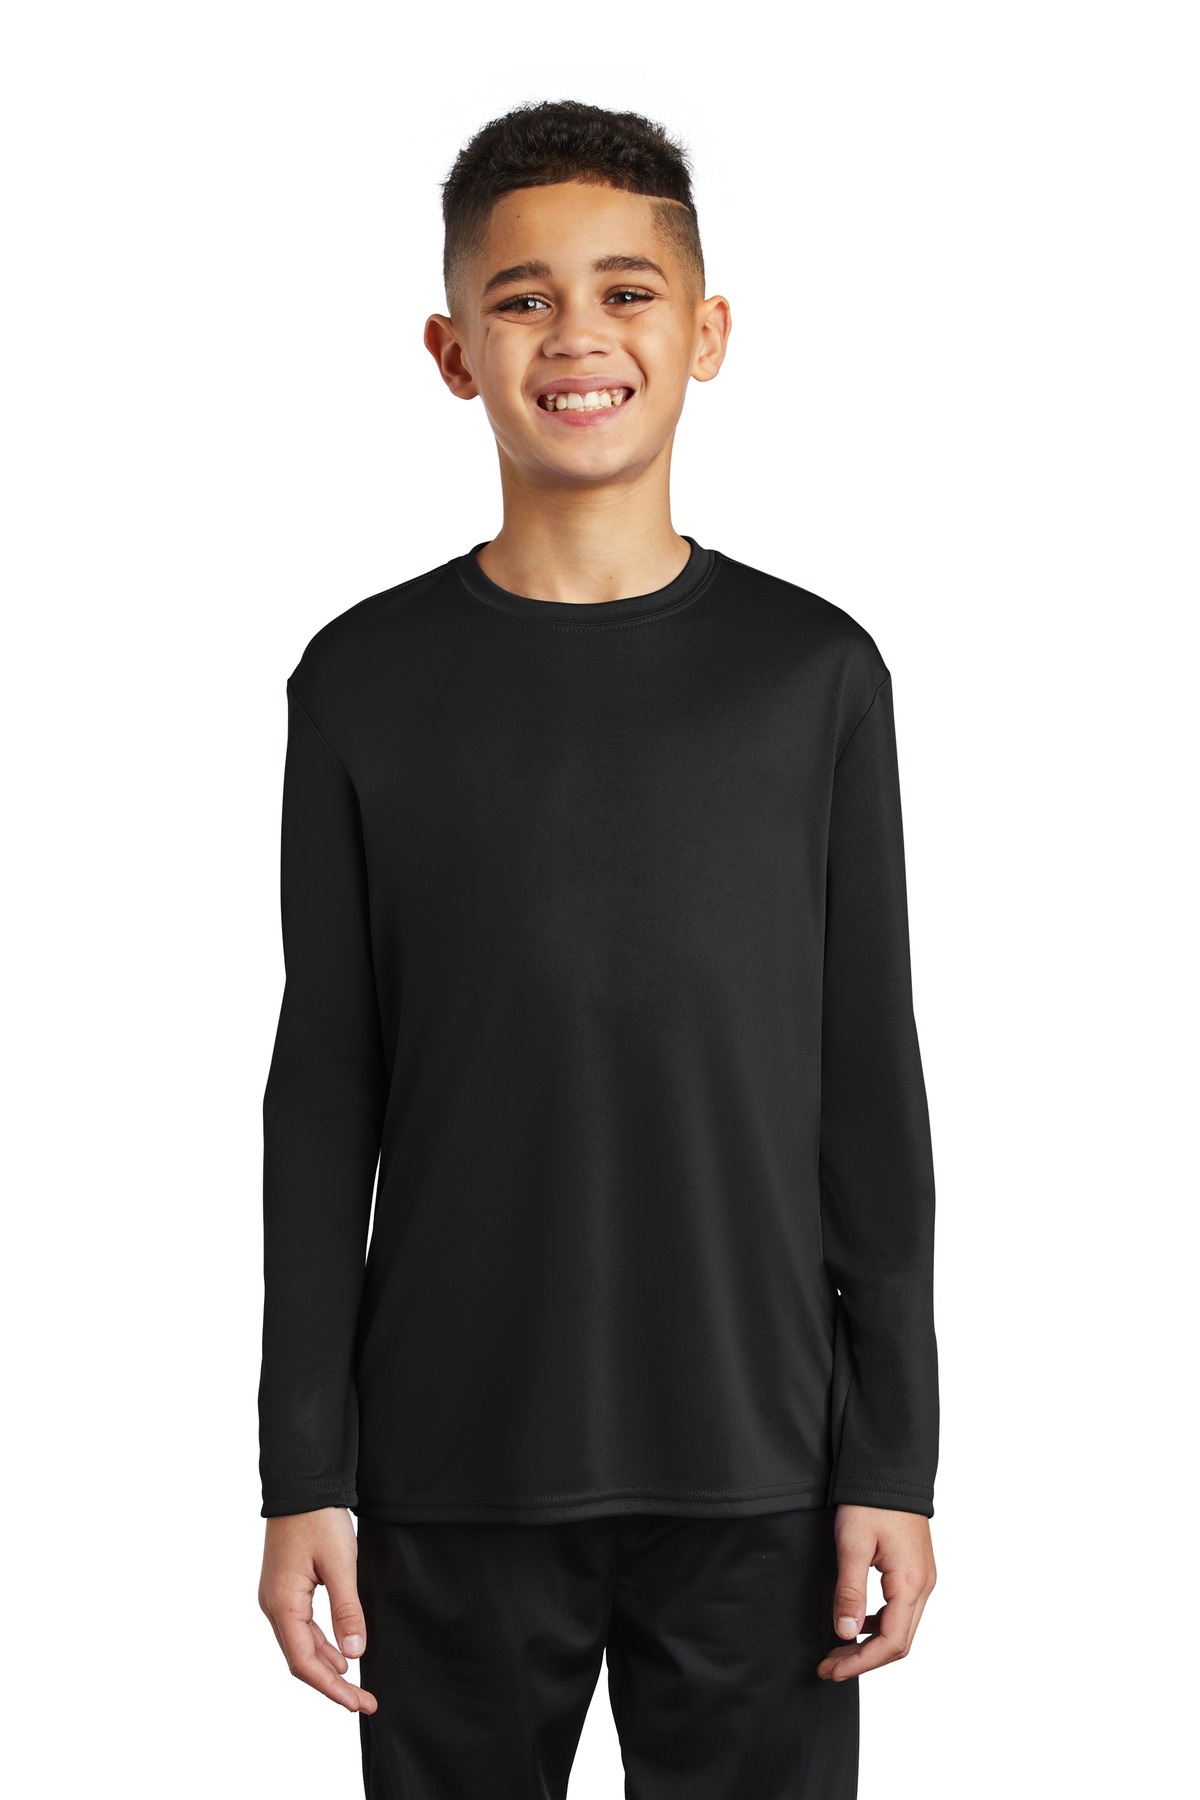 Port and Company Youth Long Sleeve Performance Tee PC380YLS